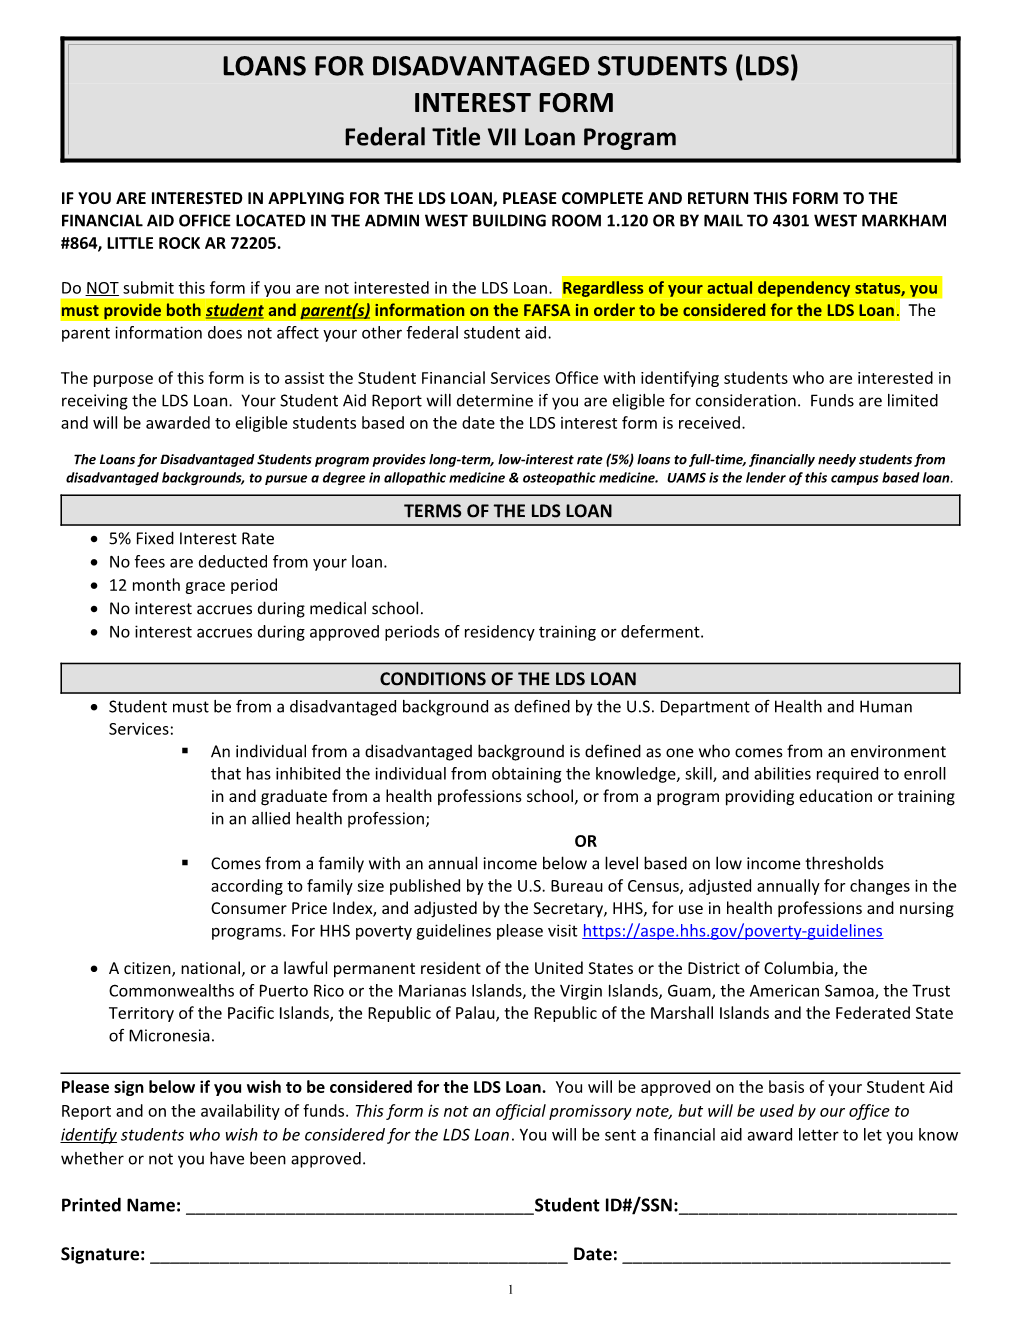 Primary Care Loan Interest Form